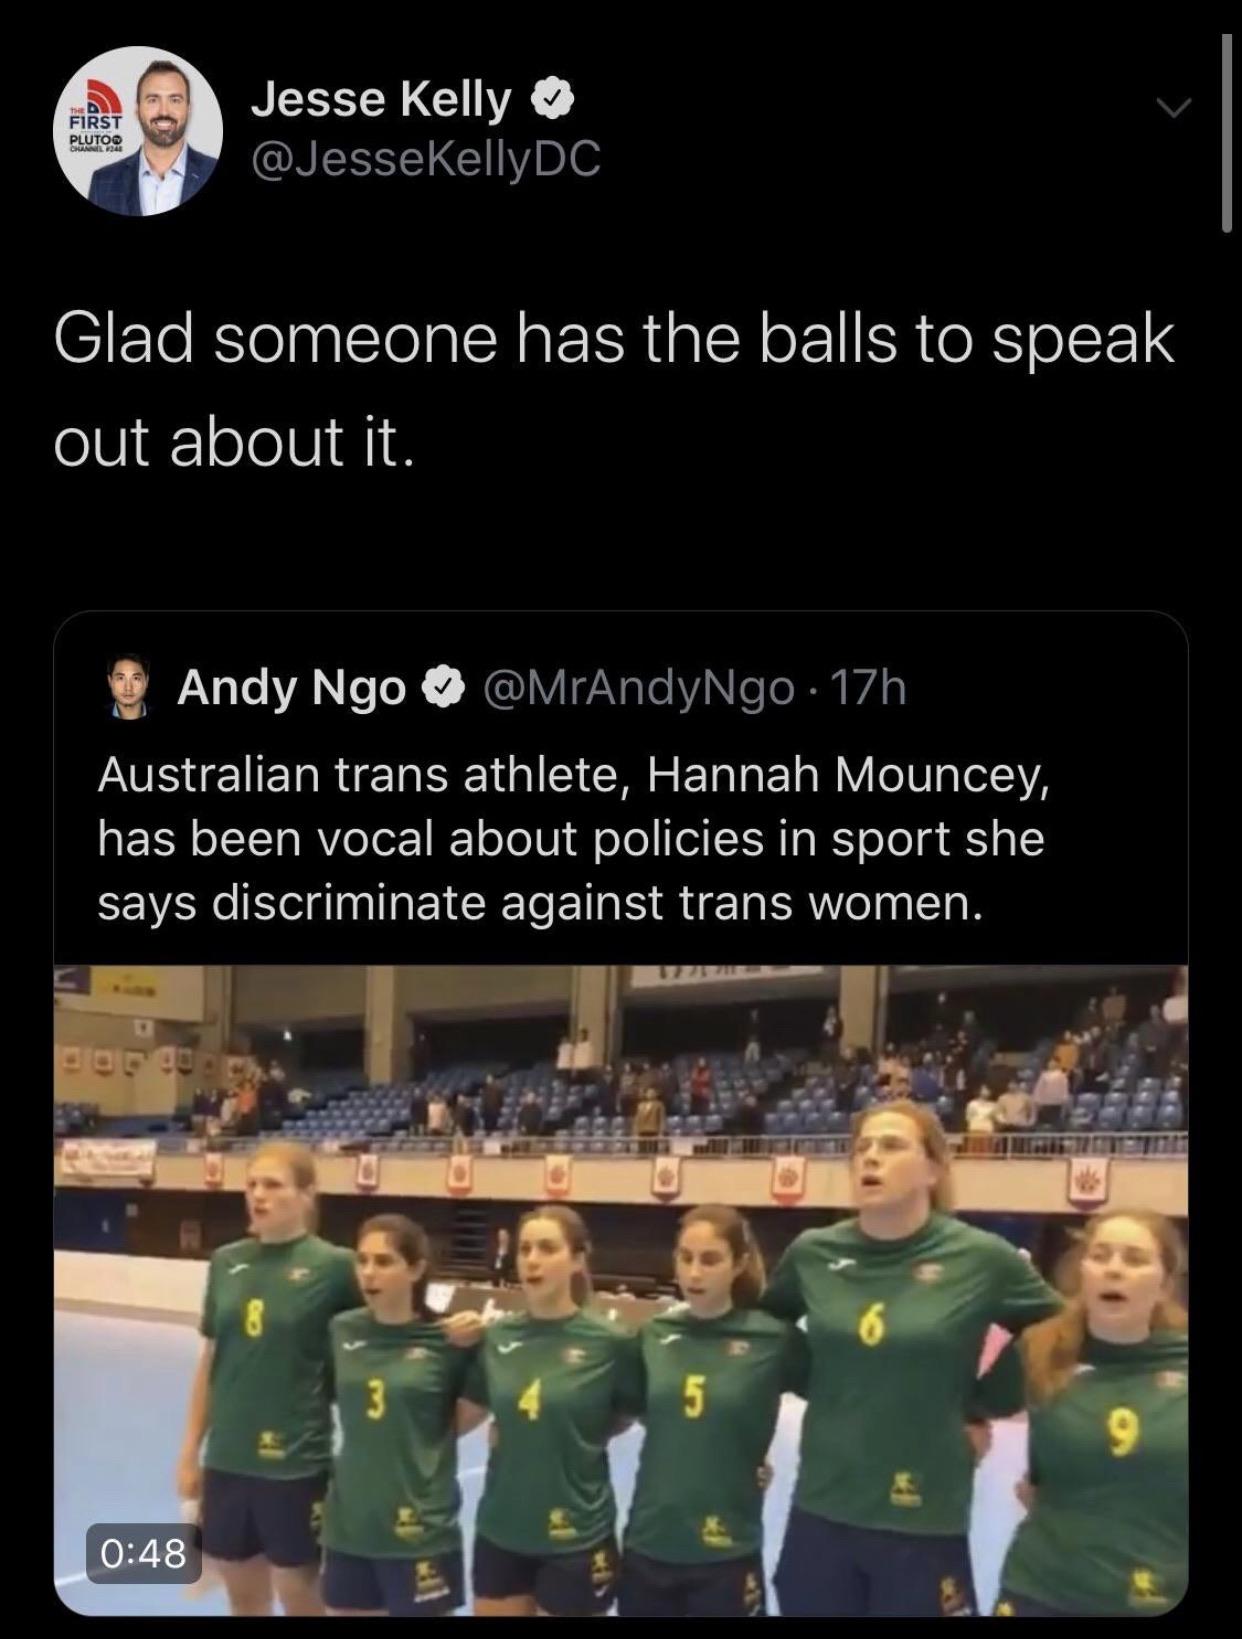 player - First Plutos Jesse Kelly Glad someone has the balls to speak out about it. Andy Ngo 17h Australian trans athlete, Hannah Mouncey, has been vocal about policies in sport she says discriminate against trans women.